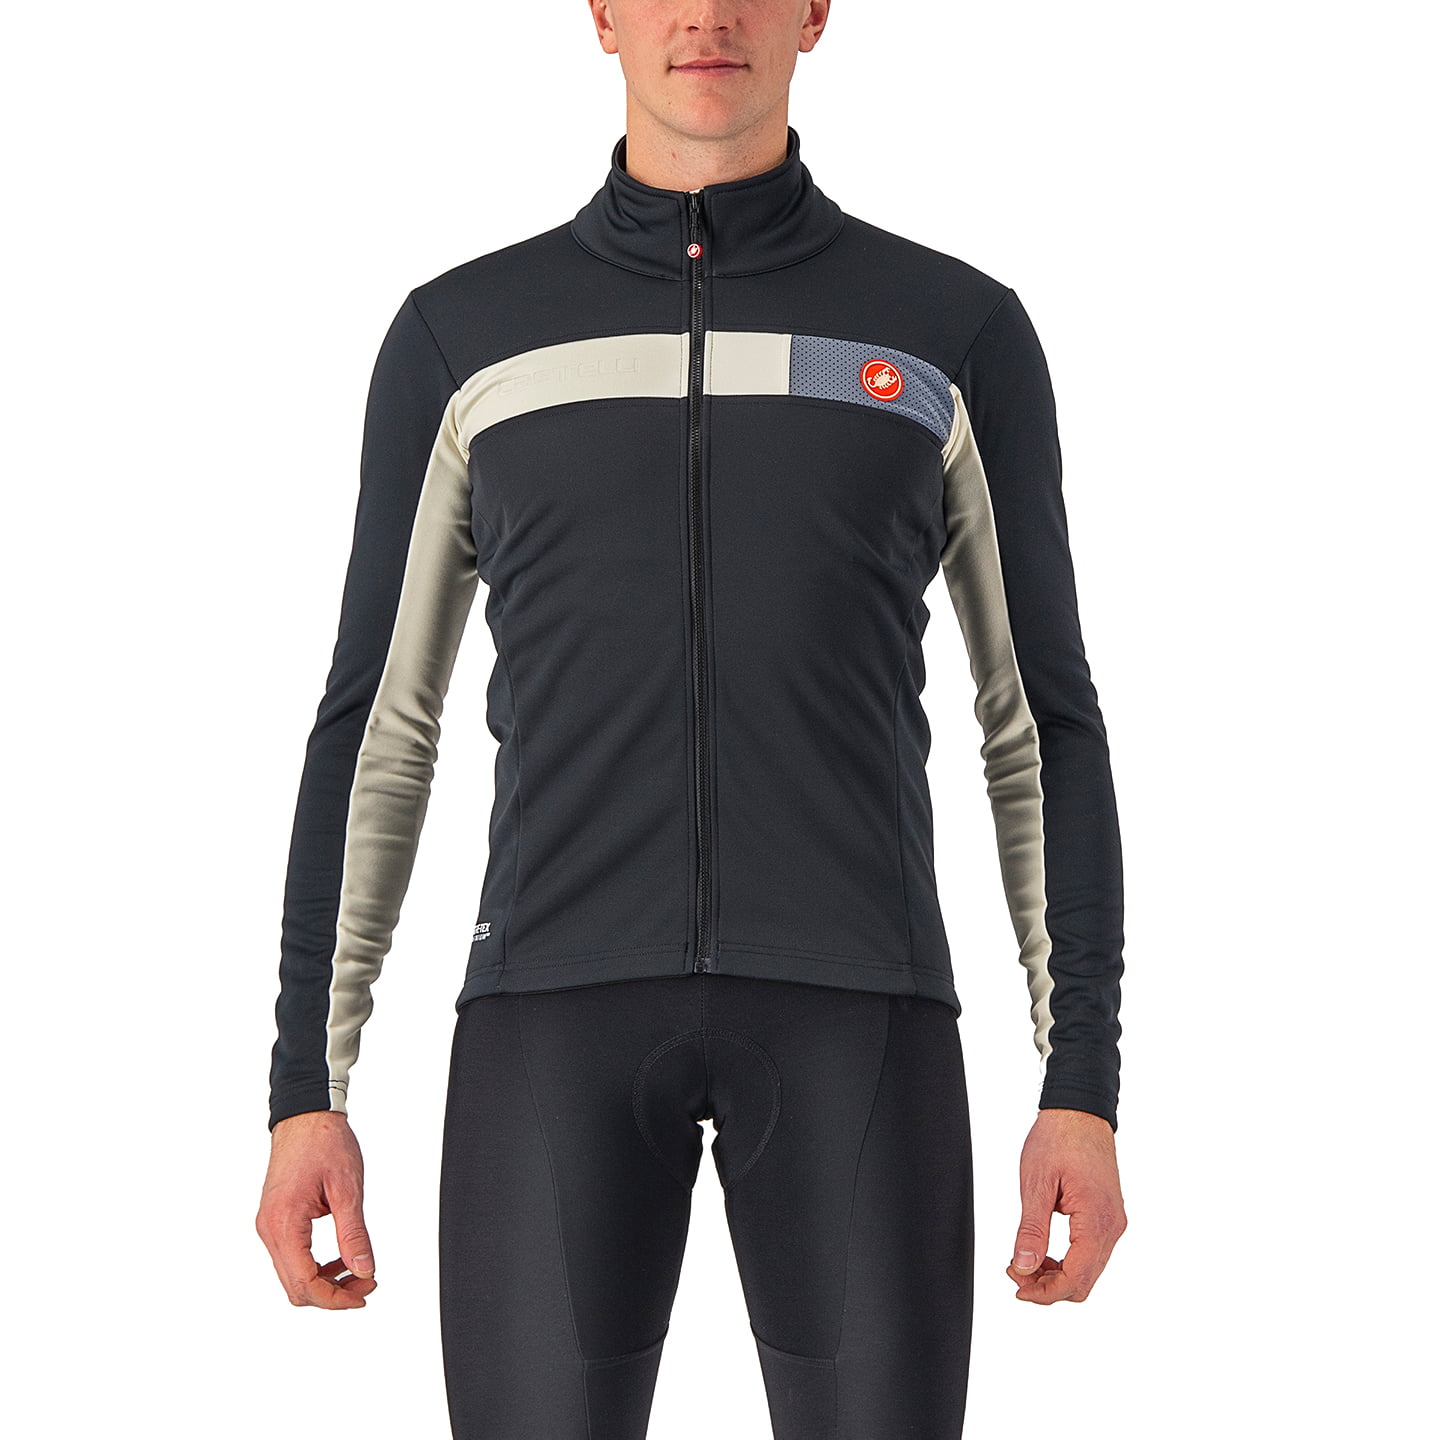 CASTELLI Mortirolo 6S Winter Jacket Thermal Jacket, for men, size L, Winter jacket, Cycle clothing